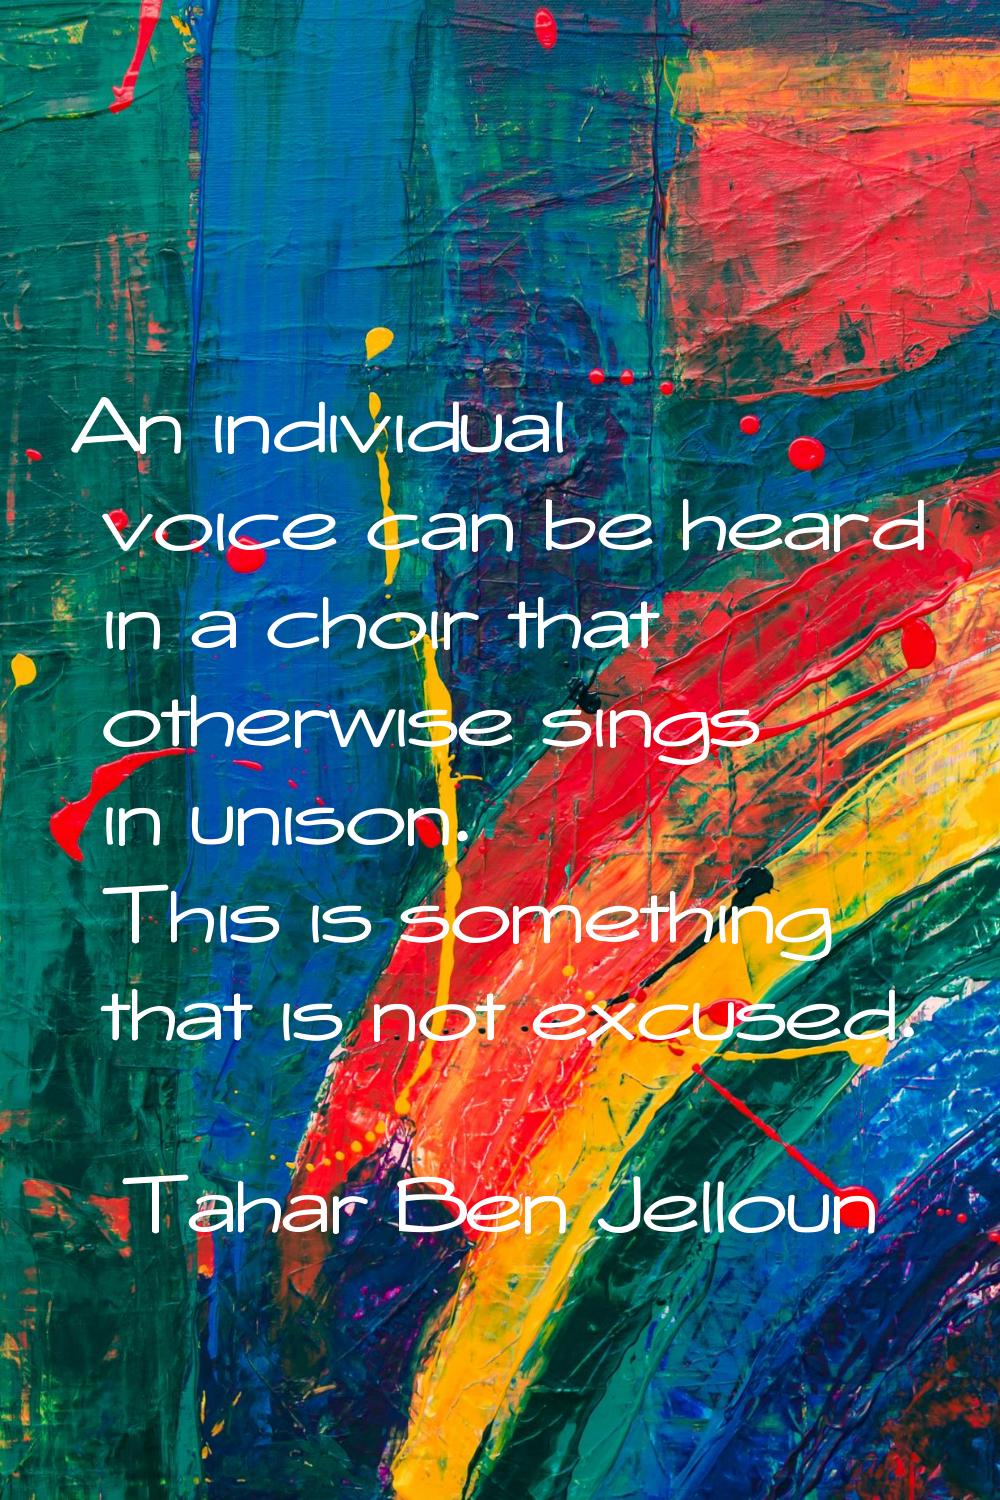 An individual voice can be heard in a choir that otherwise sings in unison. This is something that 